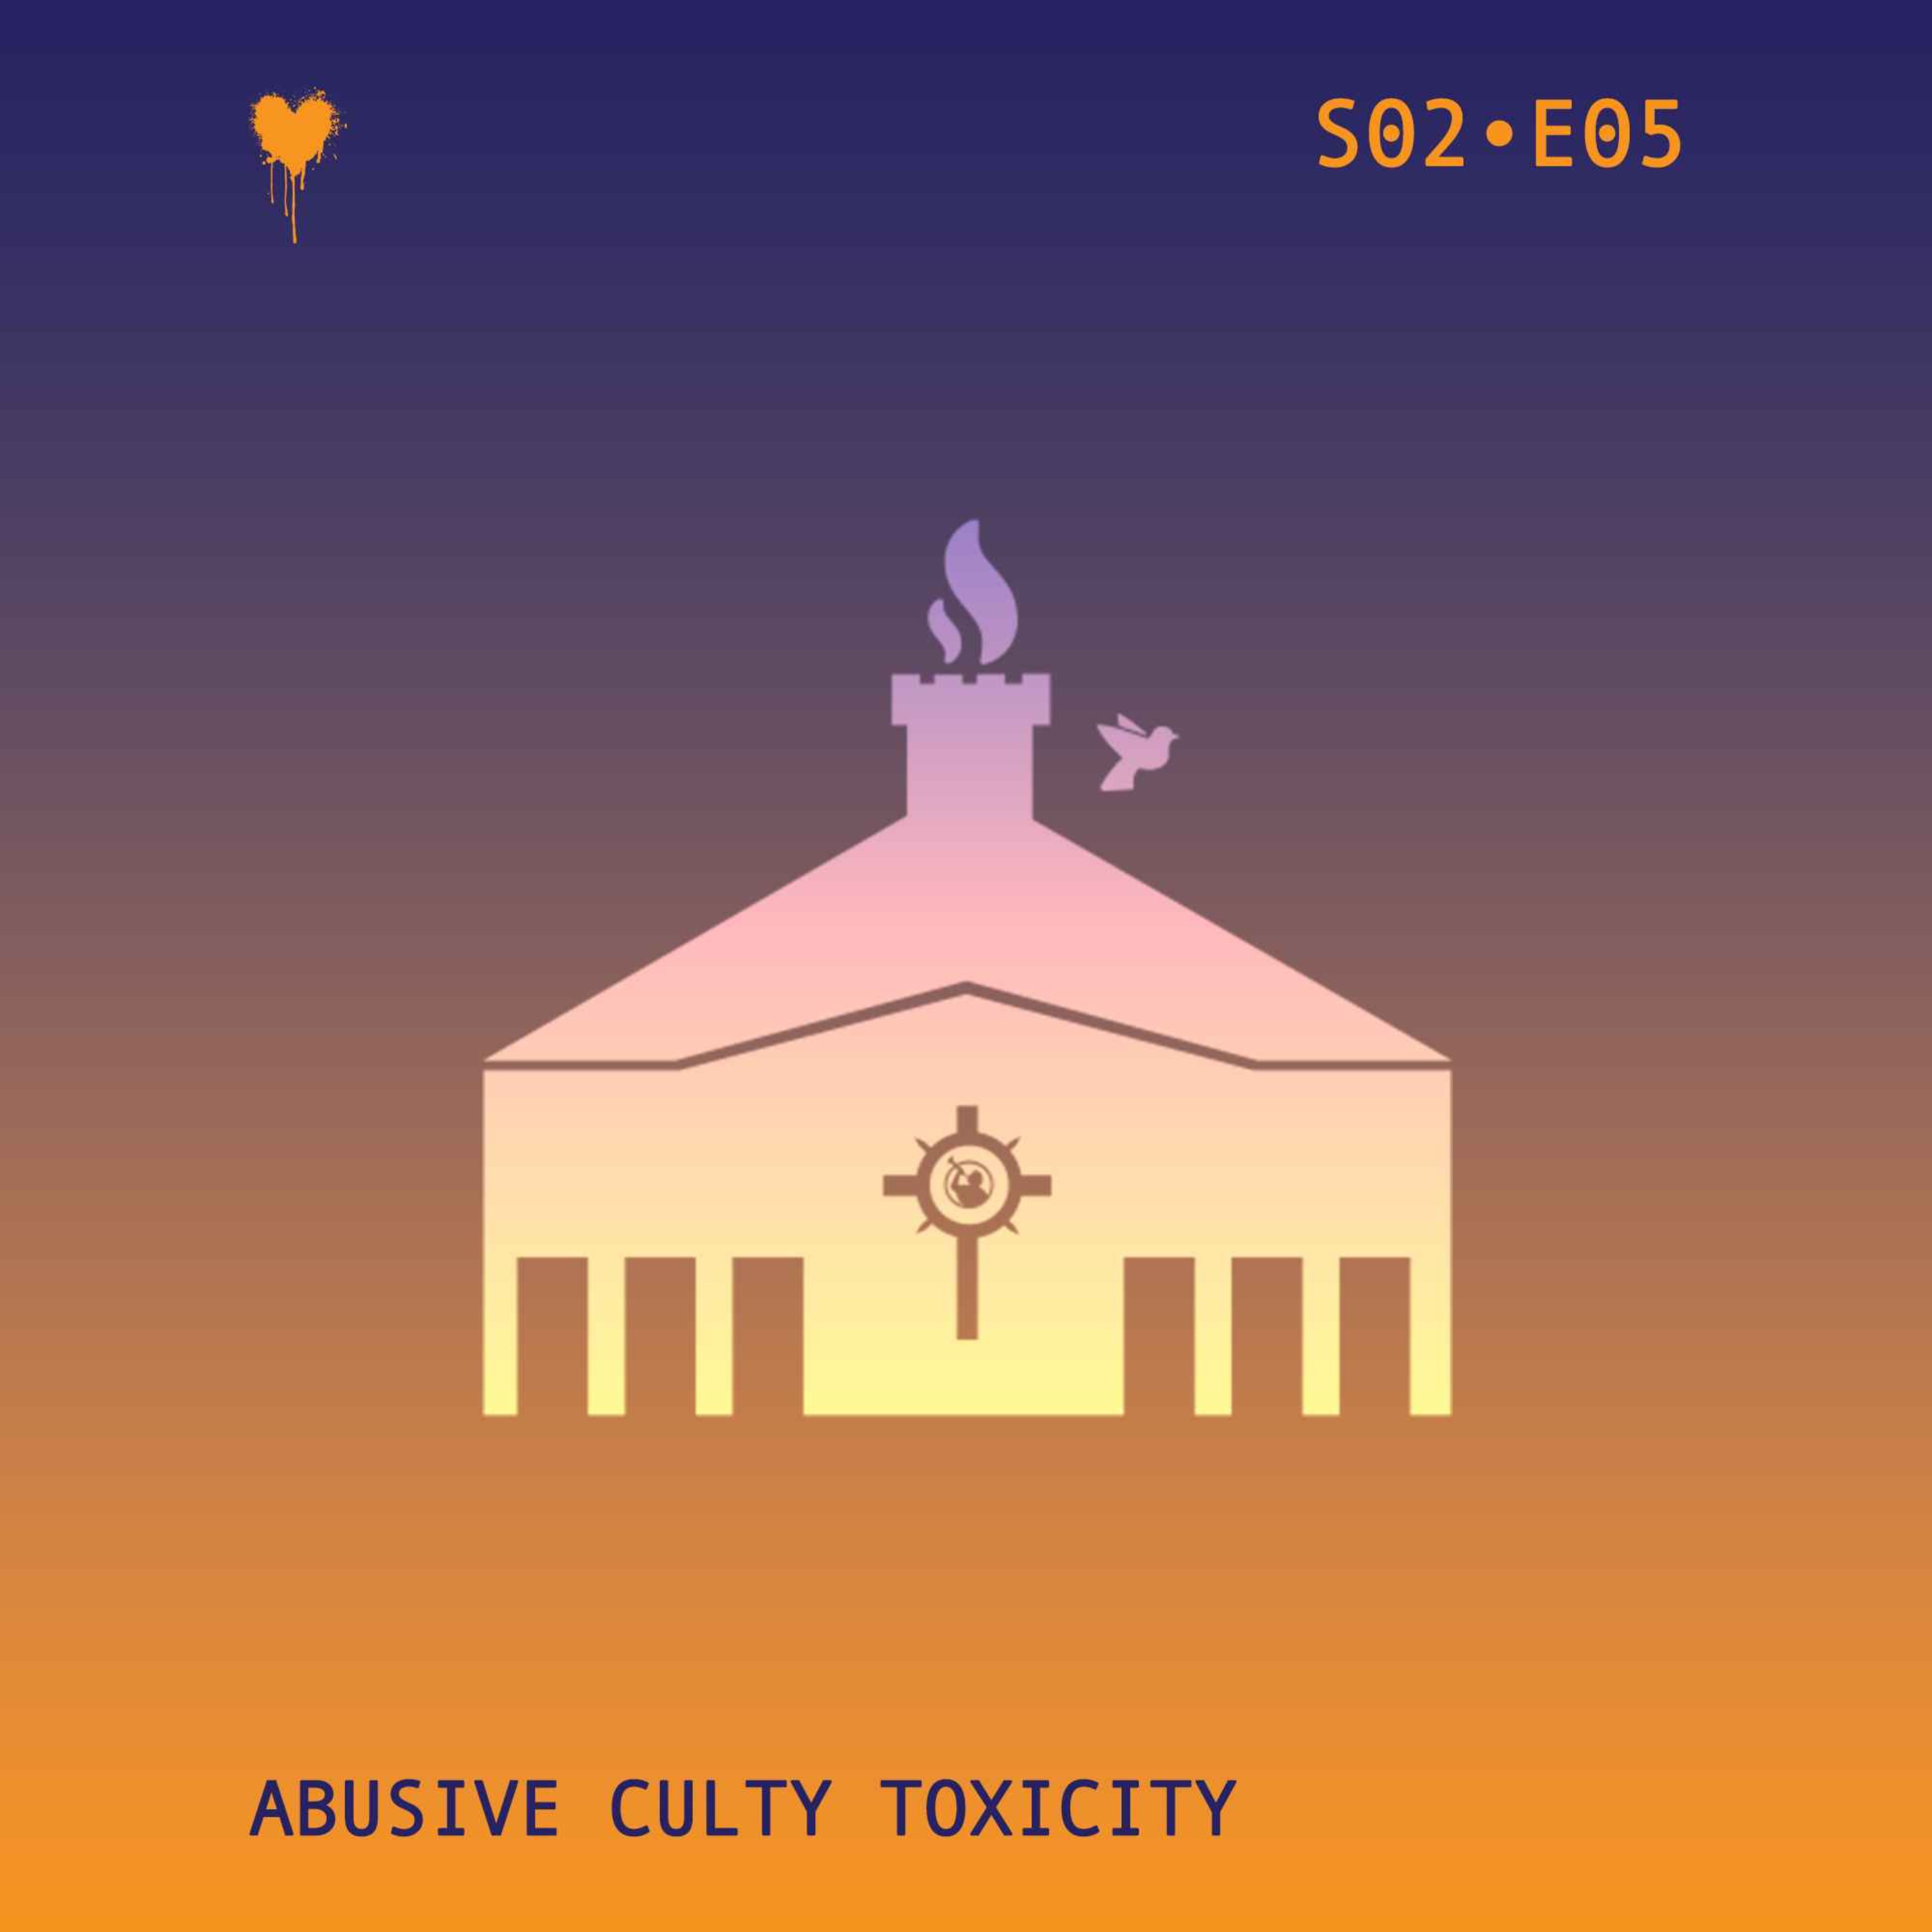 Abusive Culty Toxicity